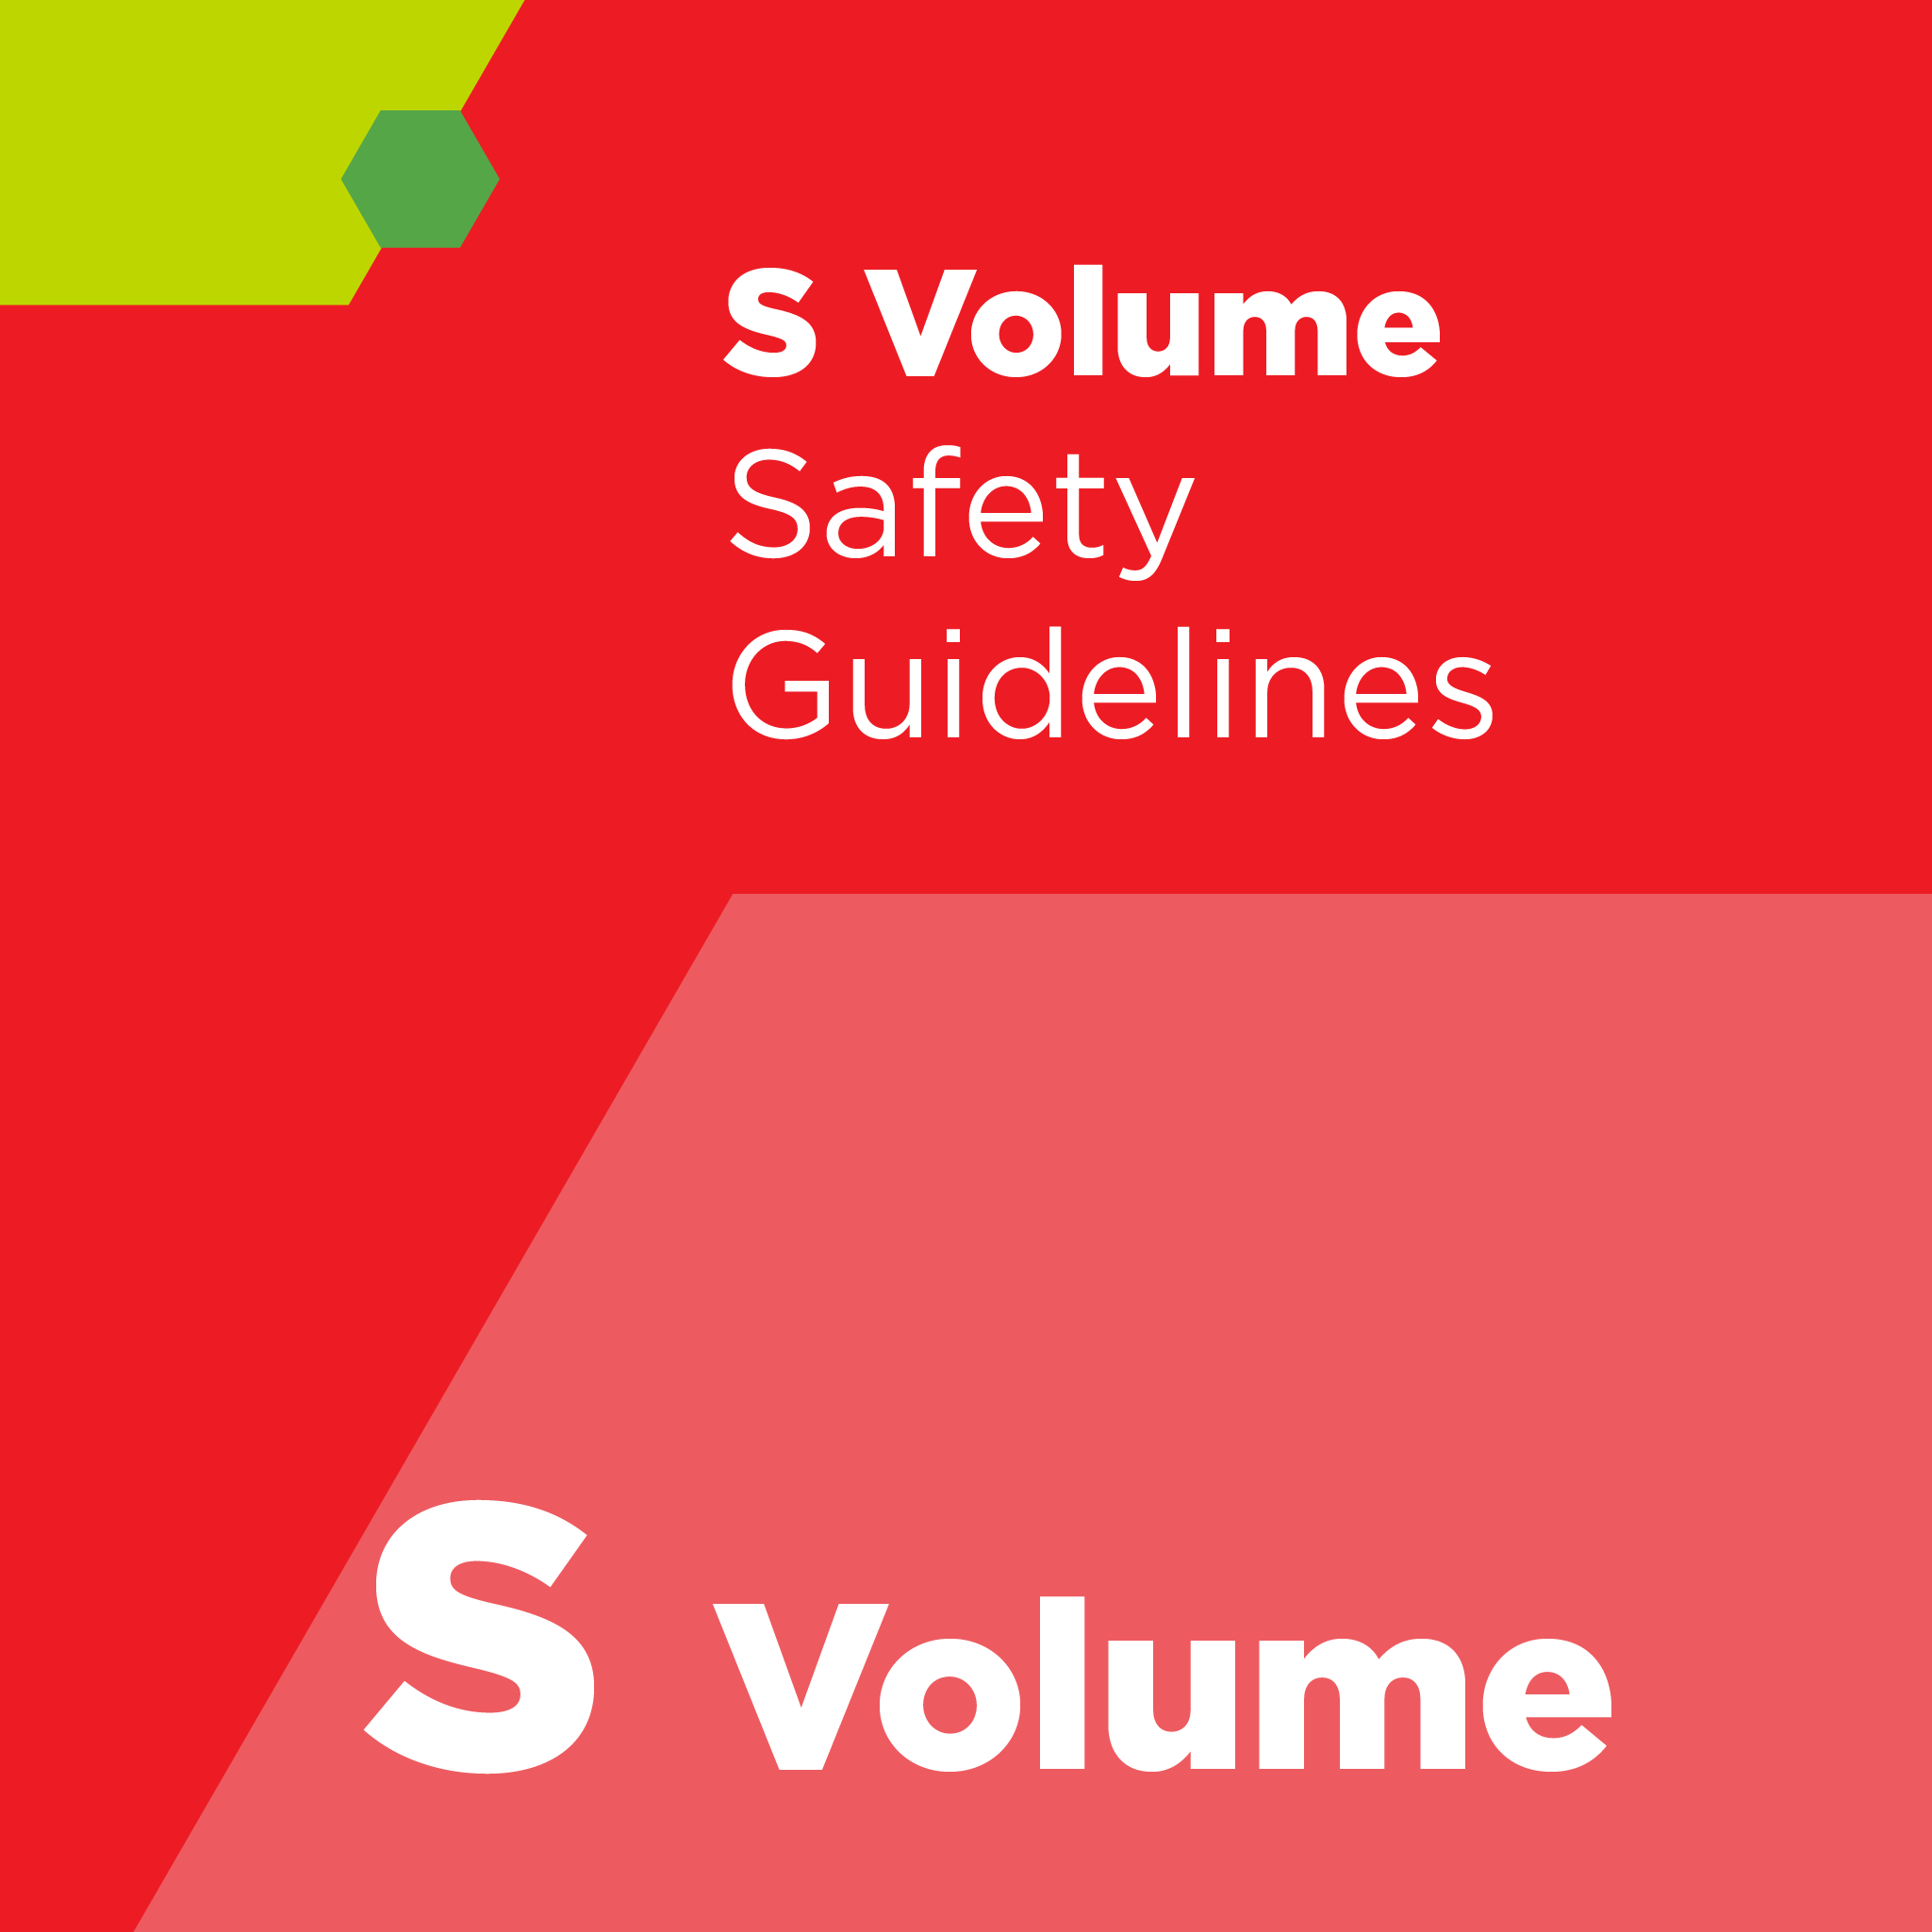 S02700 - SEMI S27 - Safety Guideline for the Contents of Environmental, Safety, and Health (ESH) Evaluation Reports